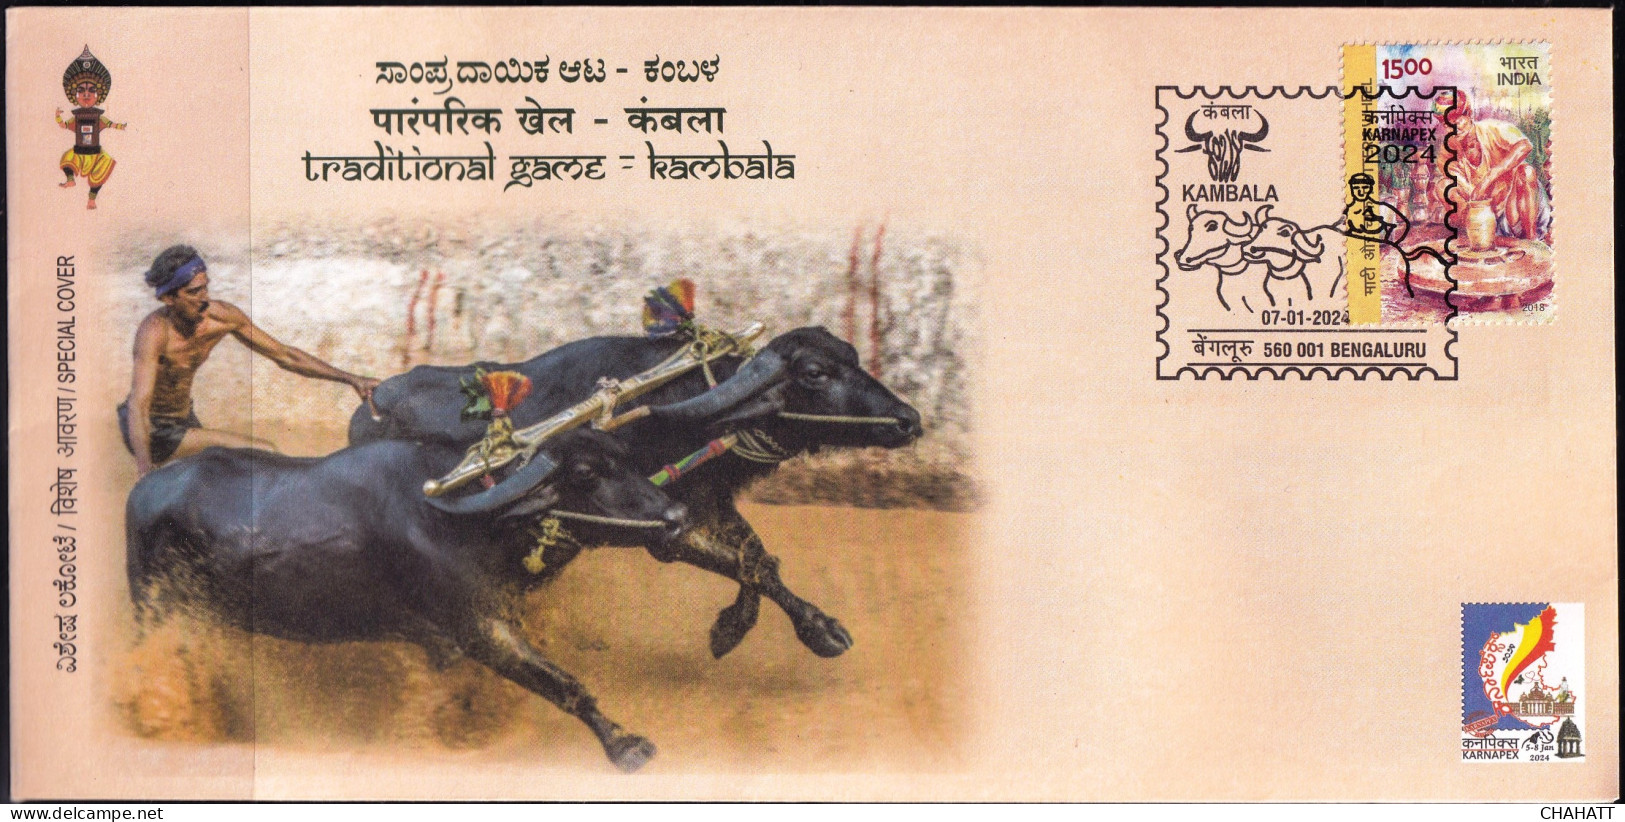 TRADITIONAL GAMES OF INDIA- KAMBALA- BUFFALO RACE- PICTORIAL CANCEL-SPECIAL COVER-INDIA POST-BX4-30 - Non Classificati